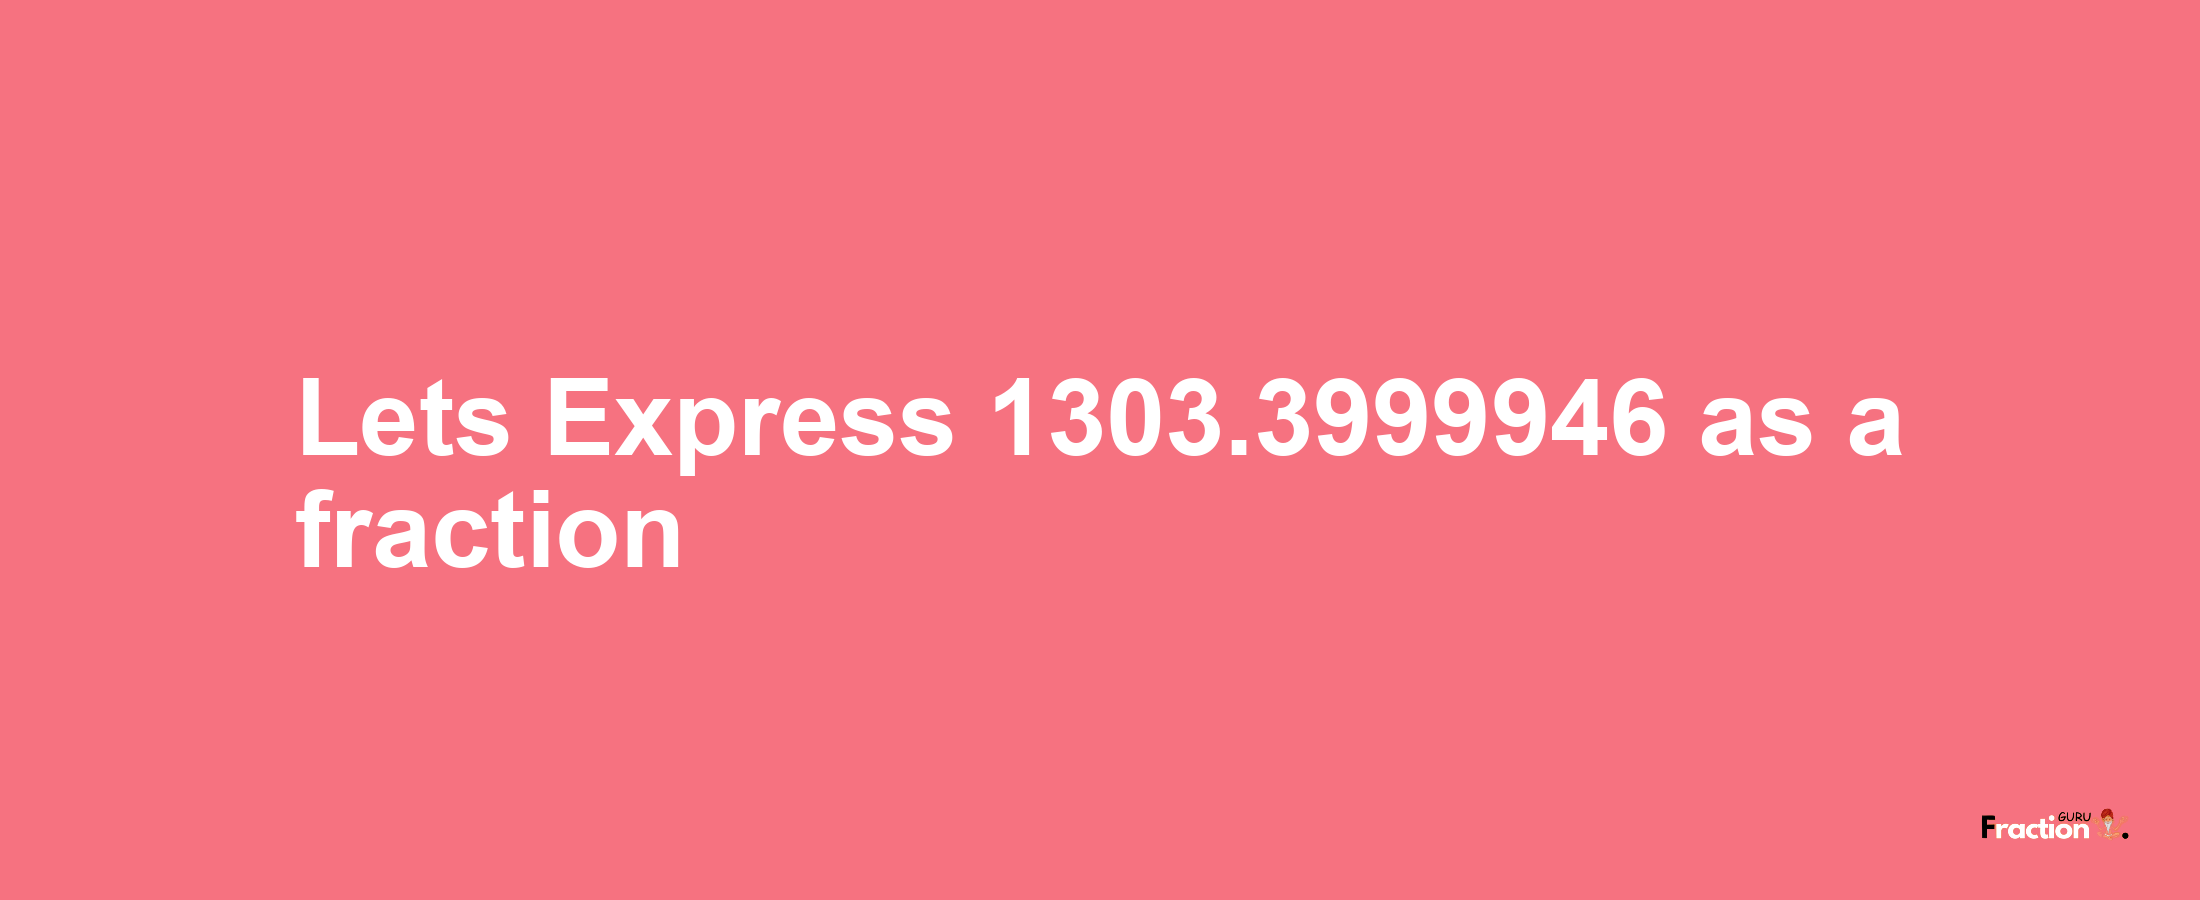 Lets Express 1303.3999946 as afraction